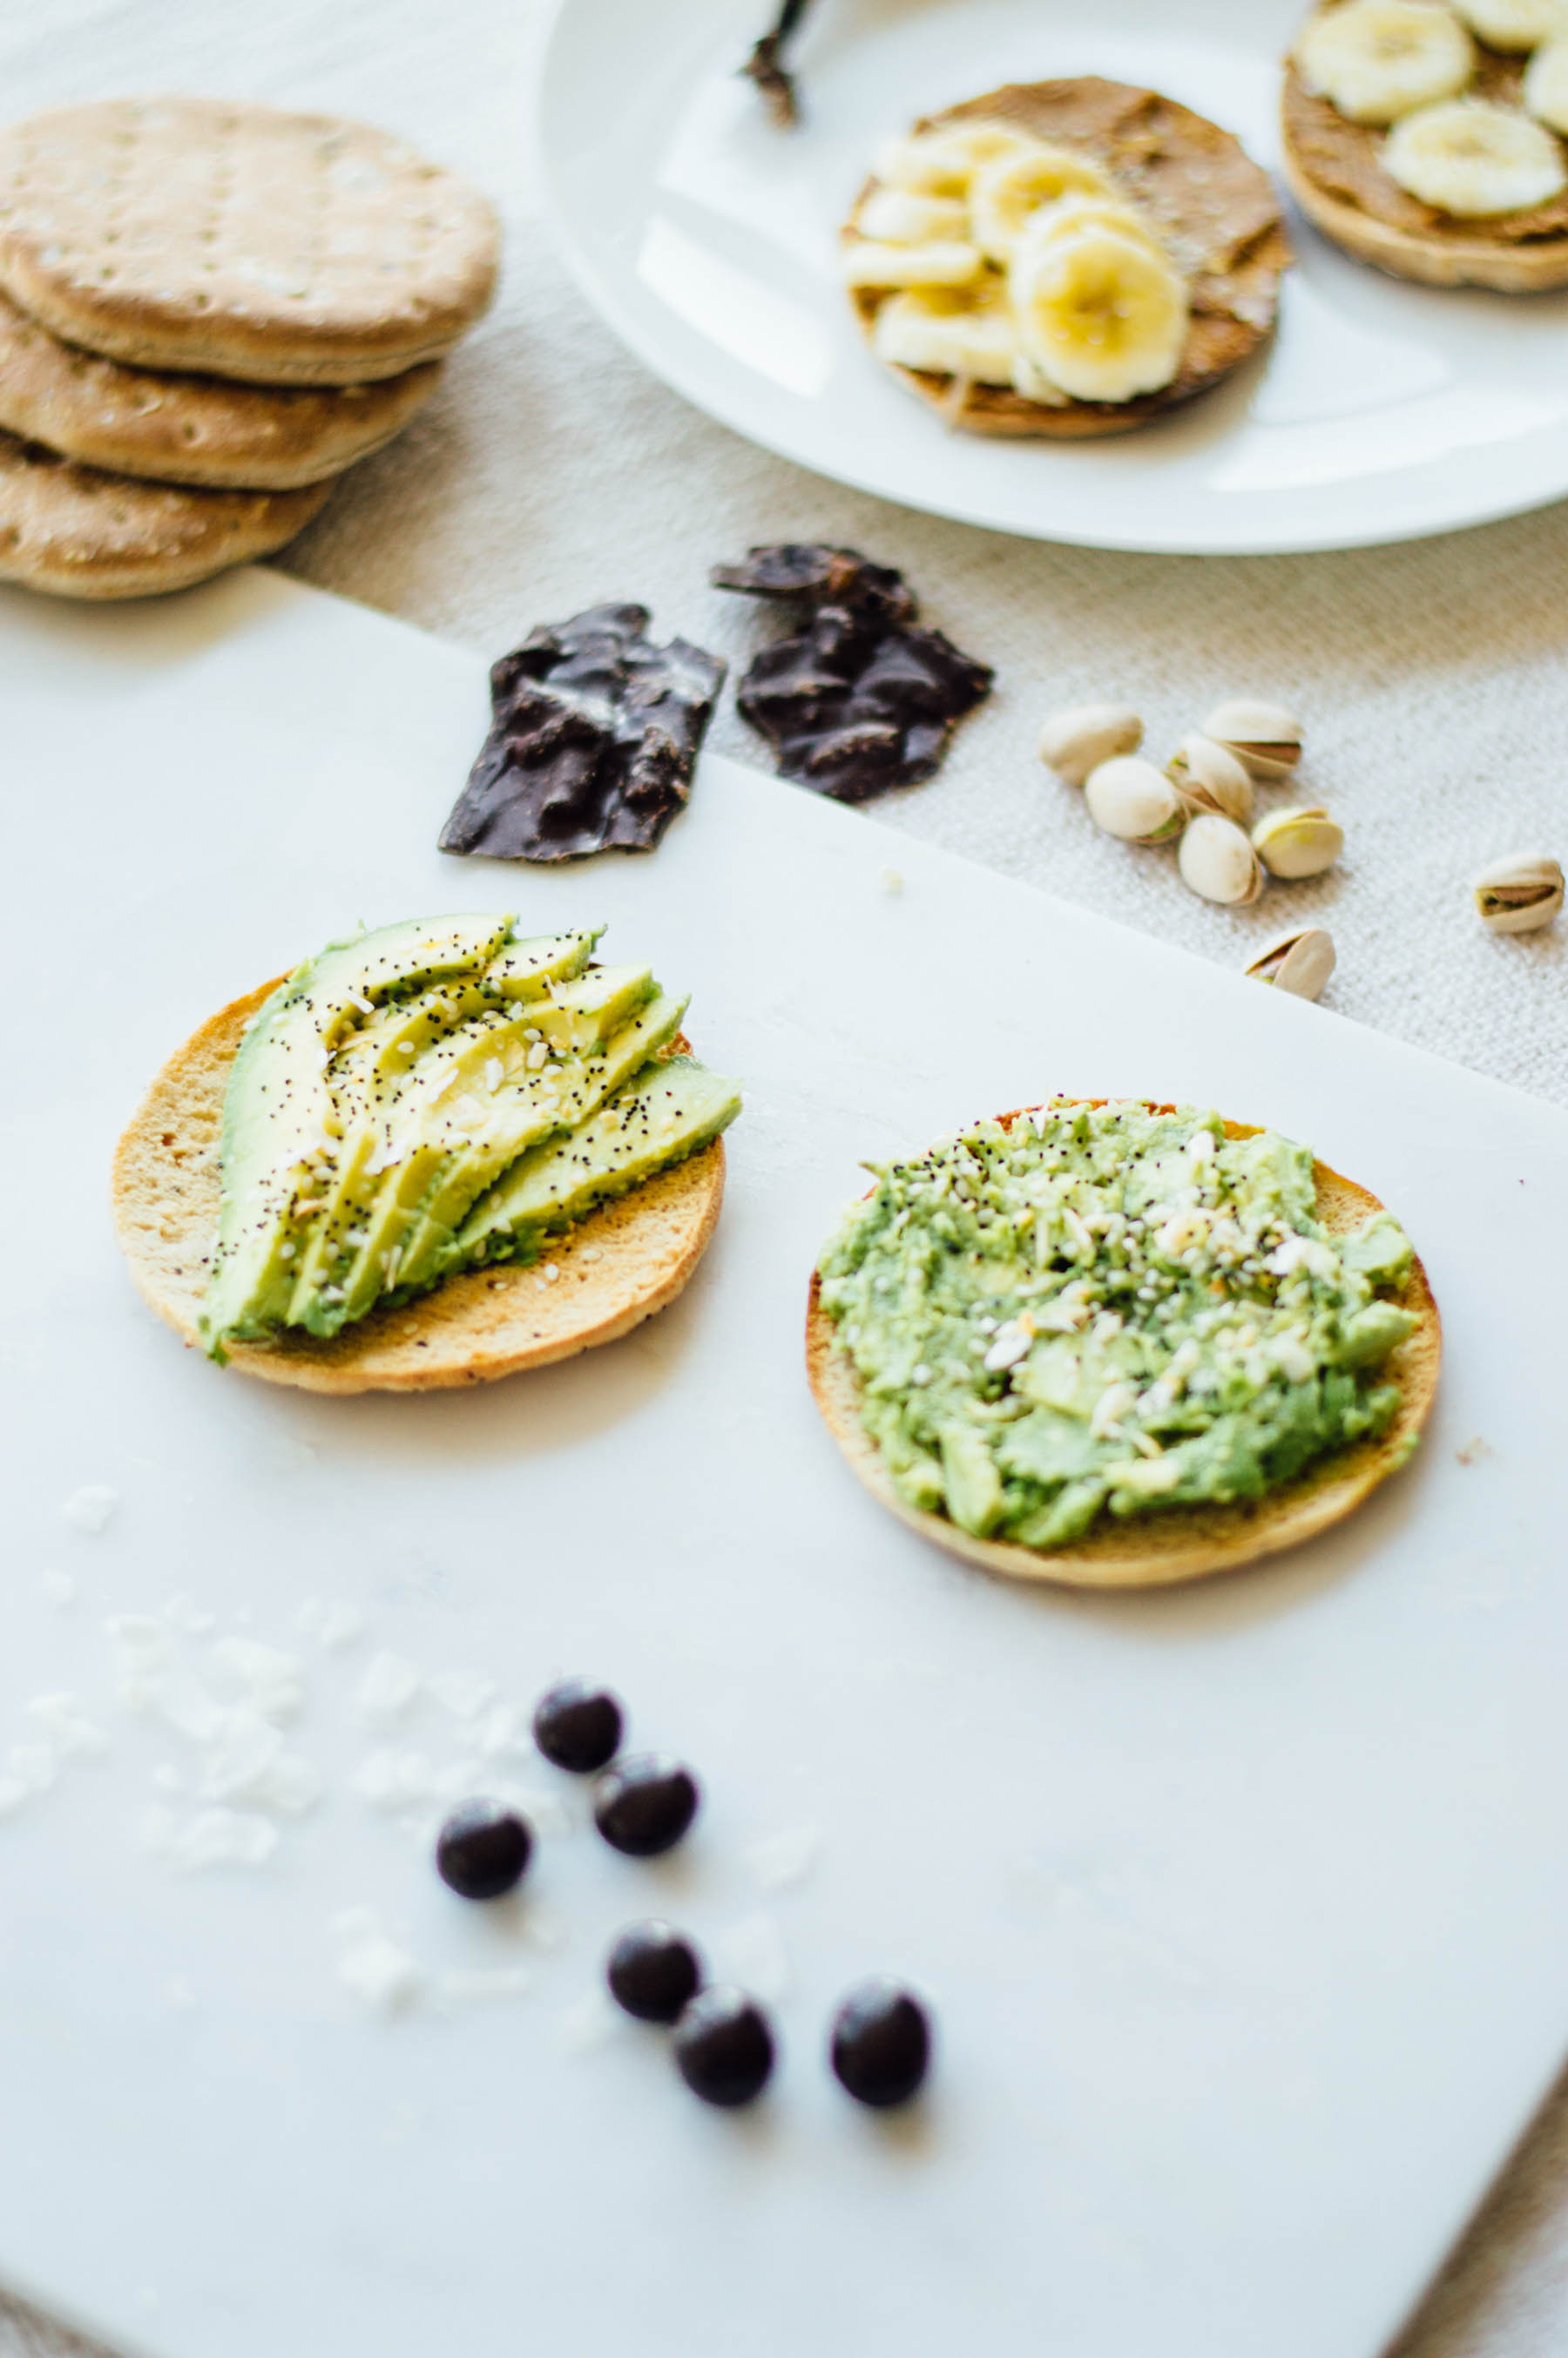 Smart snack tips for the 2017 gal on the go - think avocado everything on a sandwich thin. So much yum! | bygabriella.co